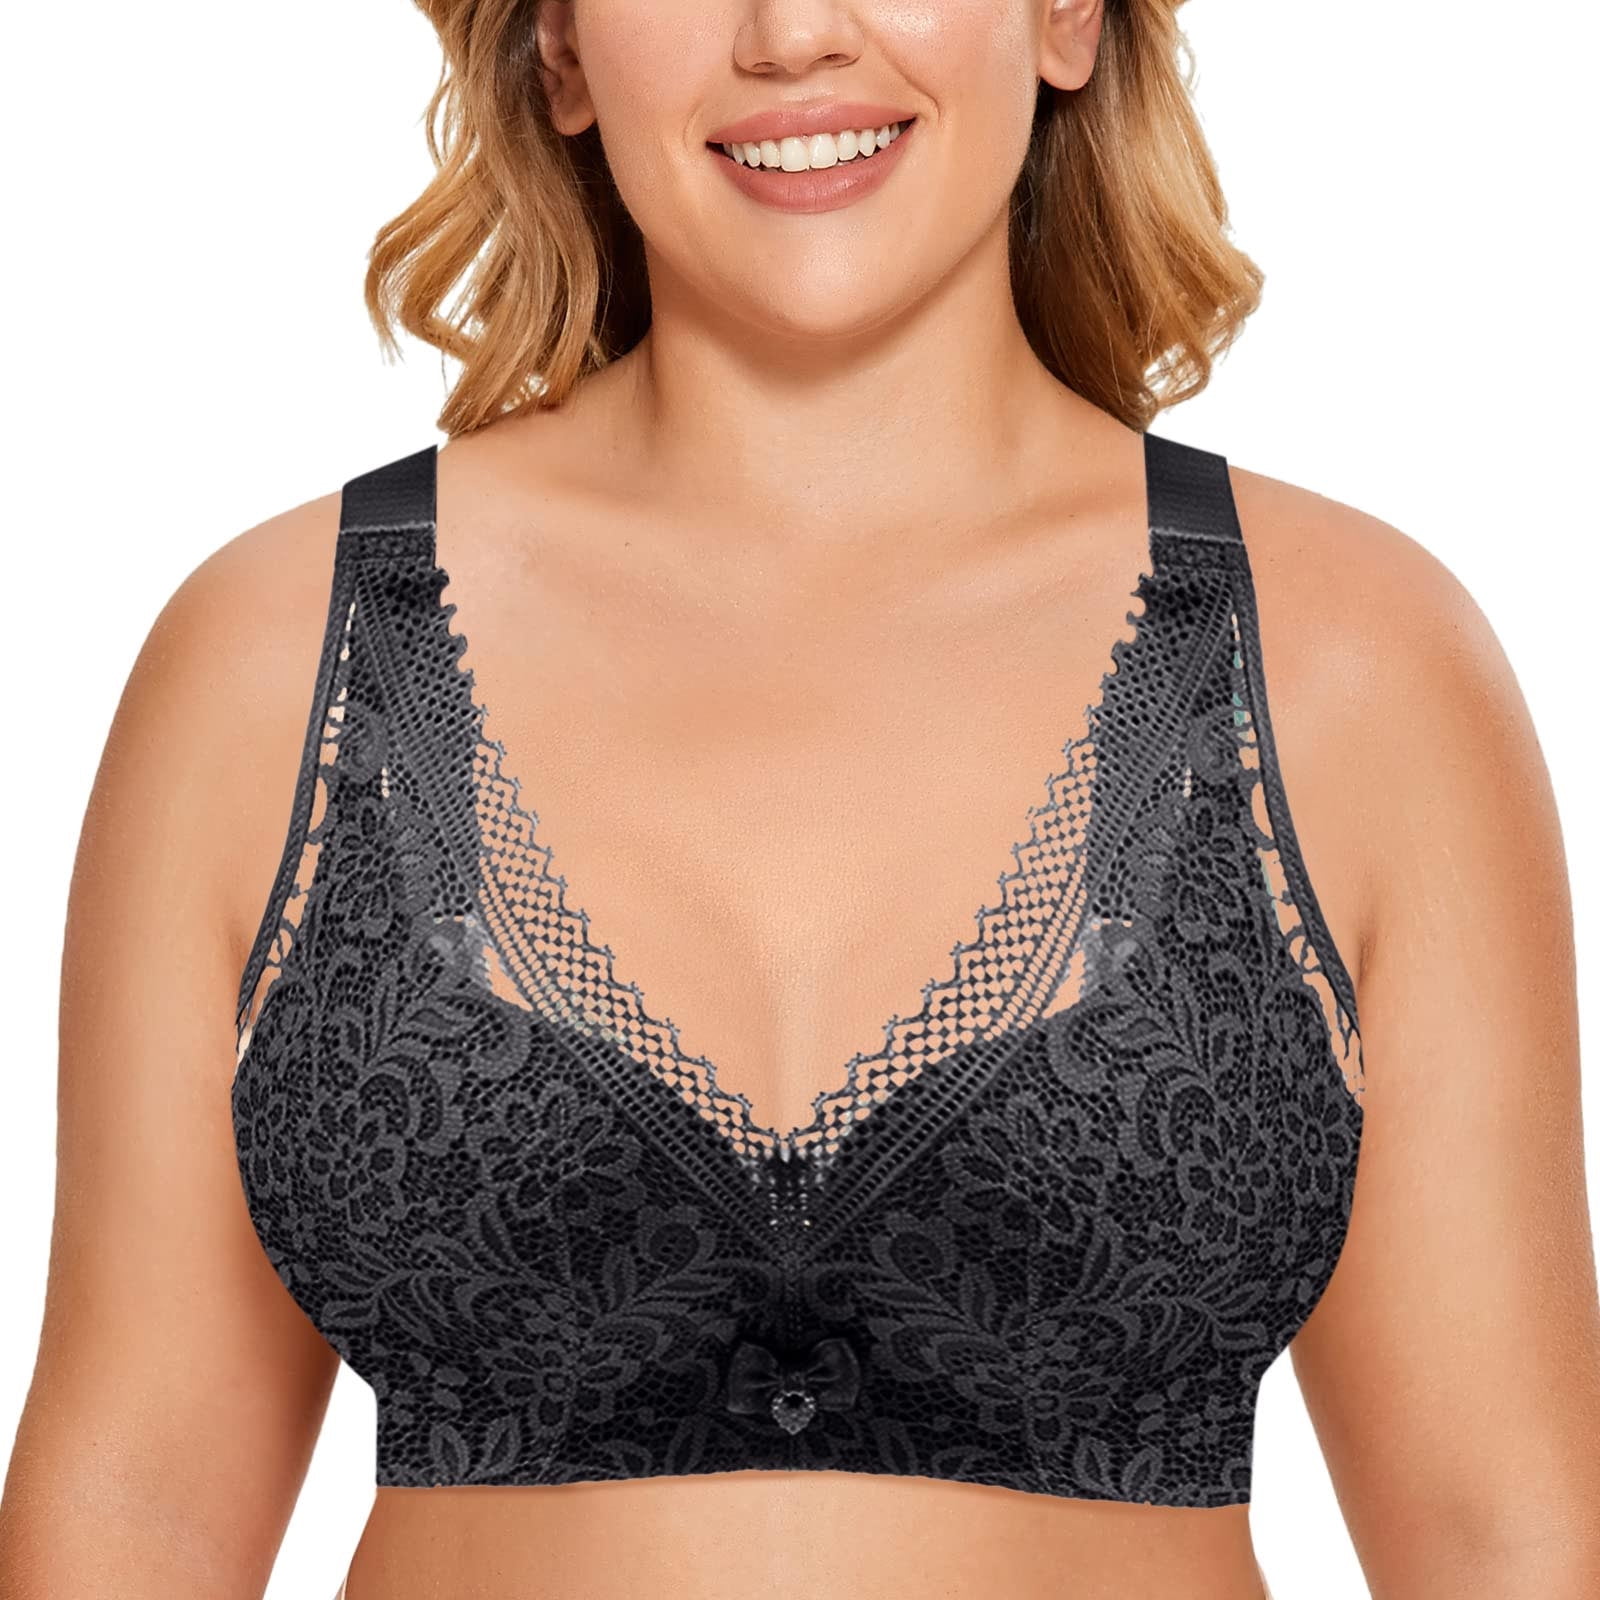 adviicd Minimizer Bras for Women Full Coverage Natural Boost Demi Bra,  Push-Up Lace T-Shirt Bra with Convertible Straps, Add-One-Cup-Size Push-Up